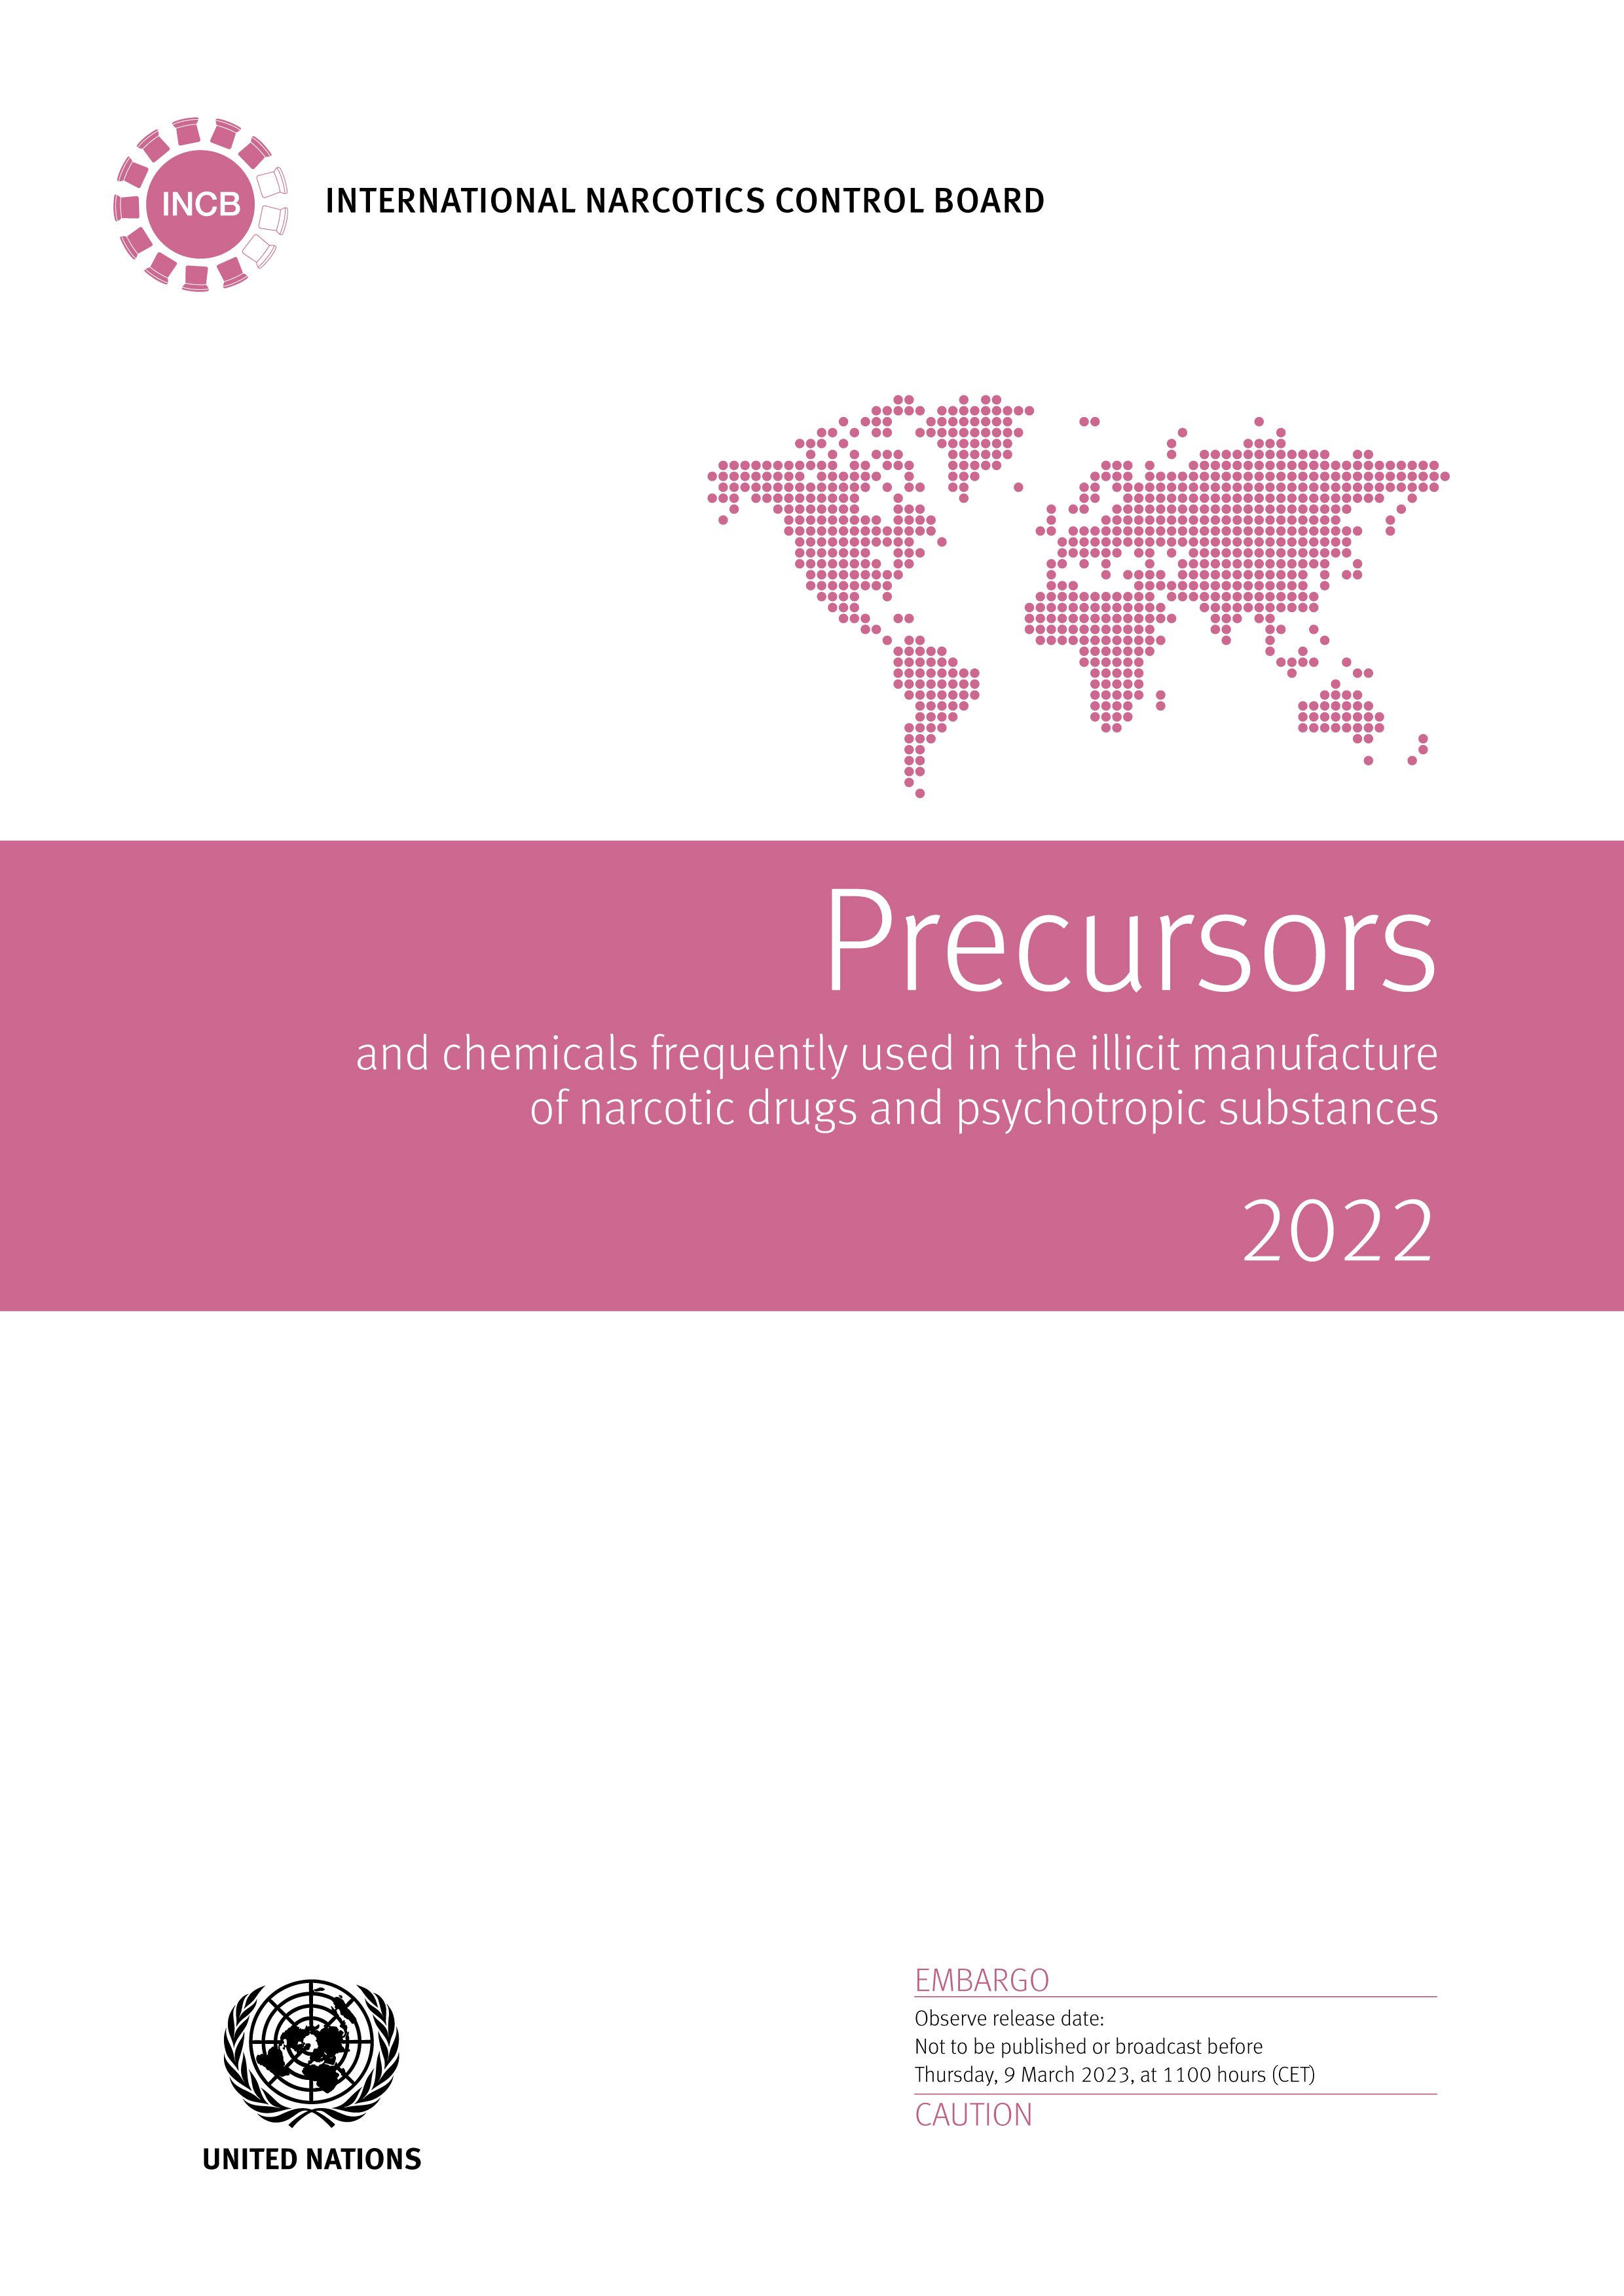 image of Precursors and Chemicals Frequently Used in the Illicit Manufacture of Narcotic Drugs and Psychotropic Substances 2022